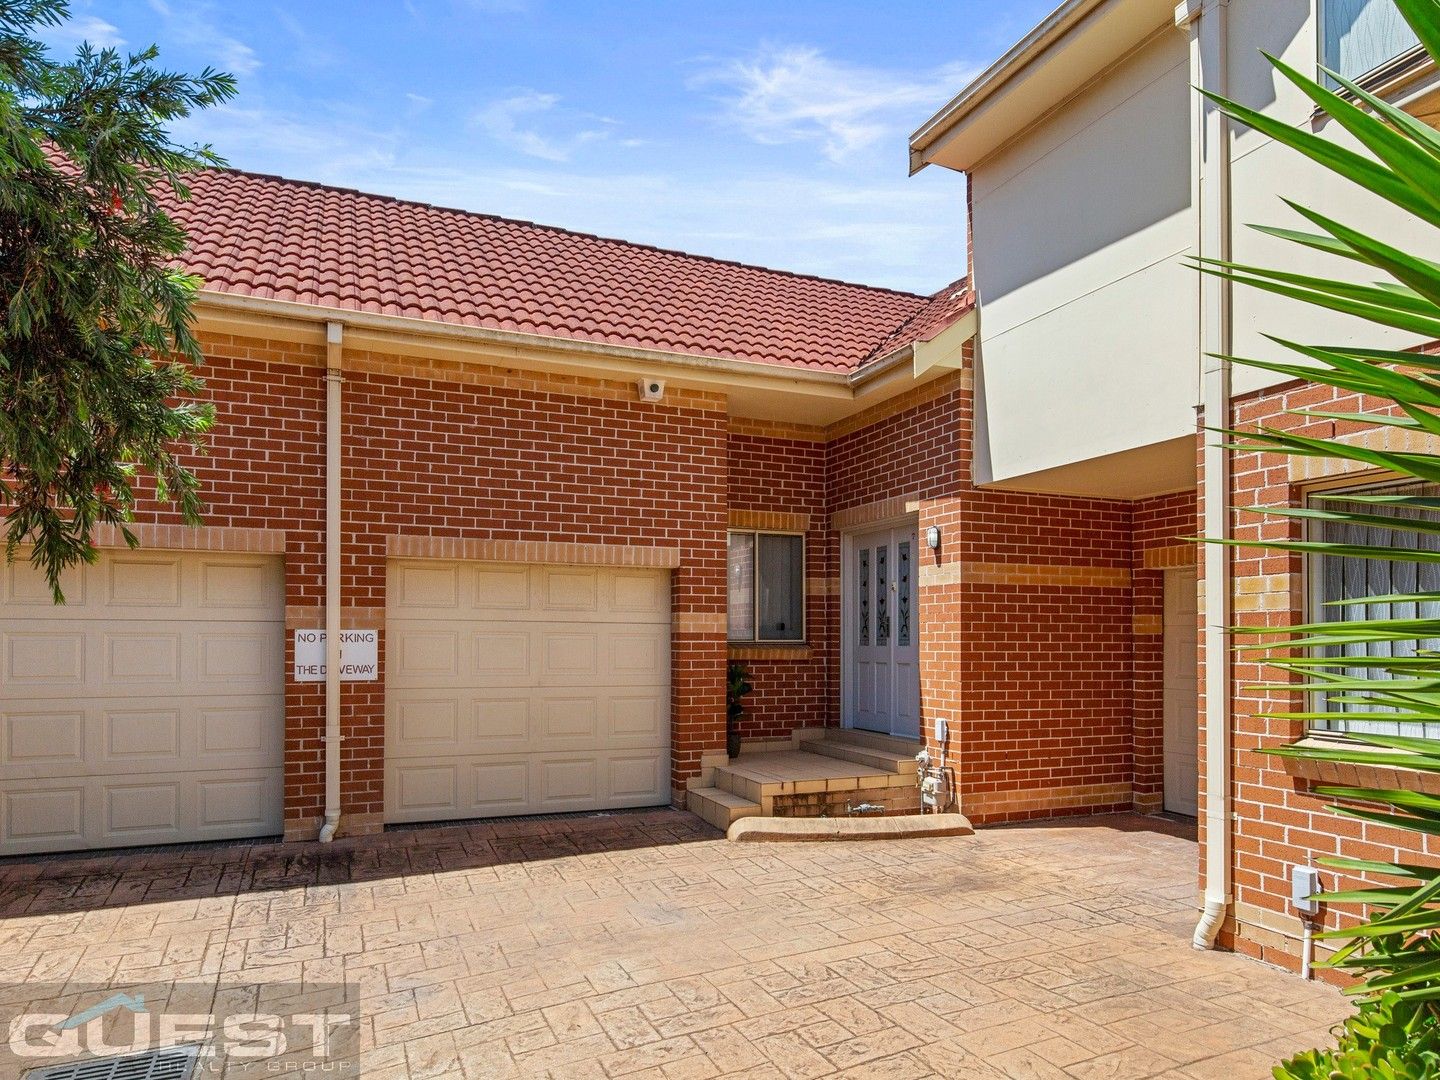 3 bedrooms Townhouse in 7/99 Bellevue Avenue GEORGES HALL NSW, 2198